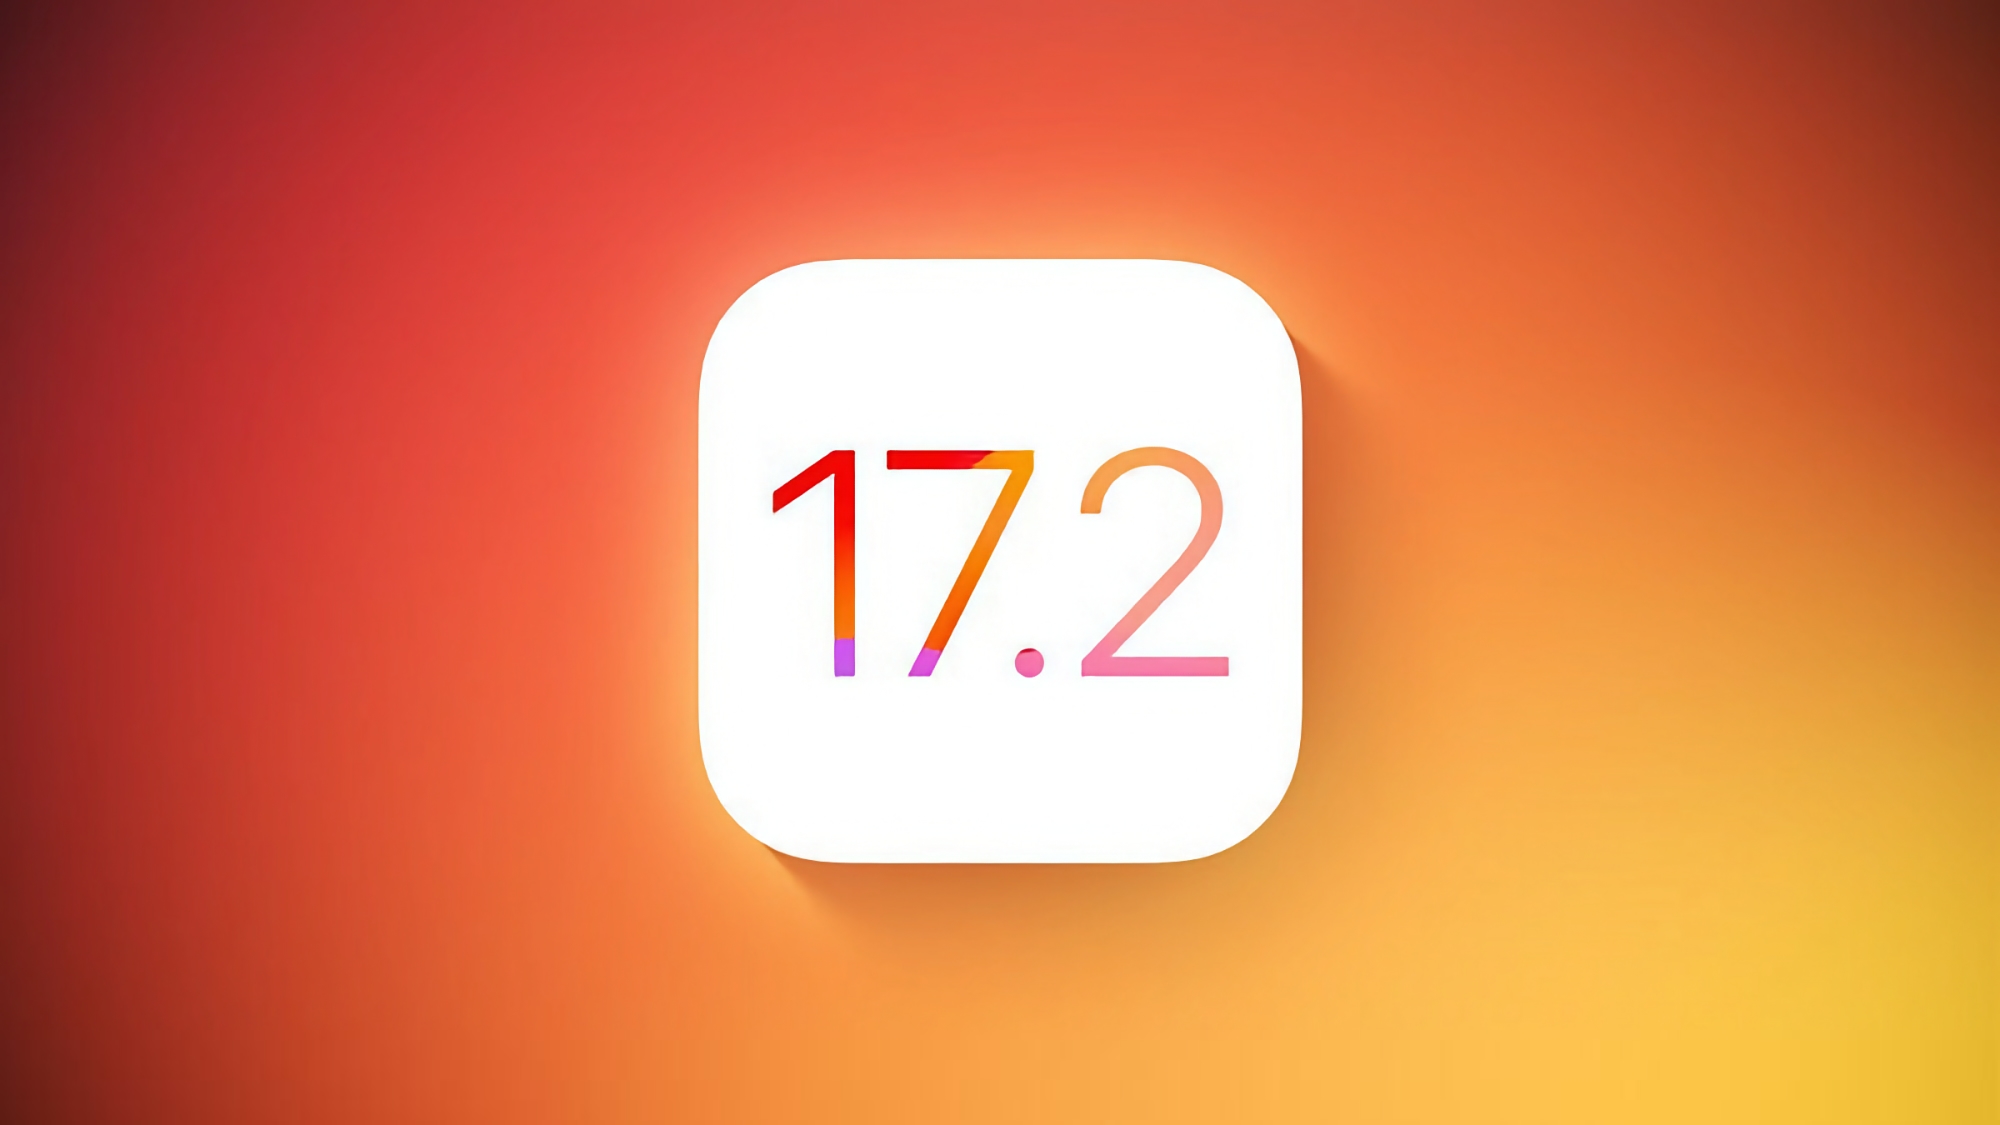 Apple released iOS 17.2 Beta 1 with the Journal app and new features